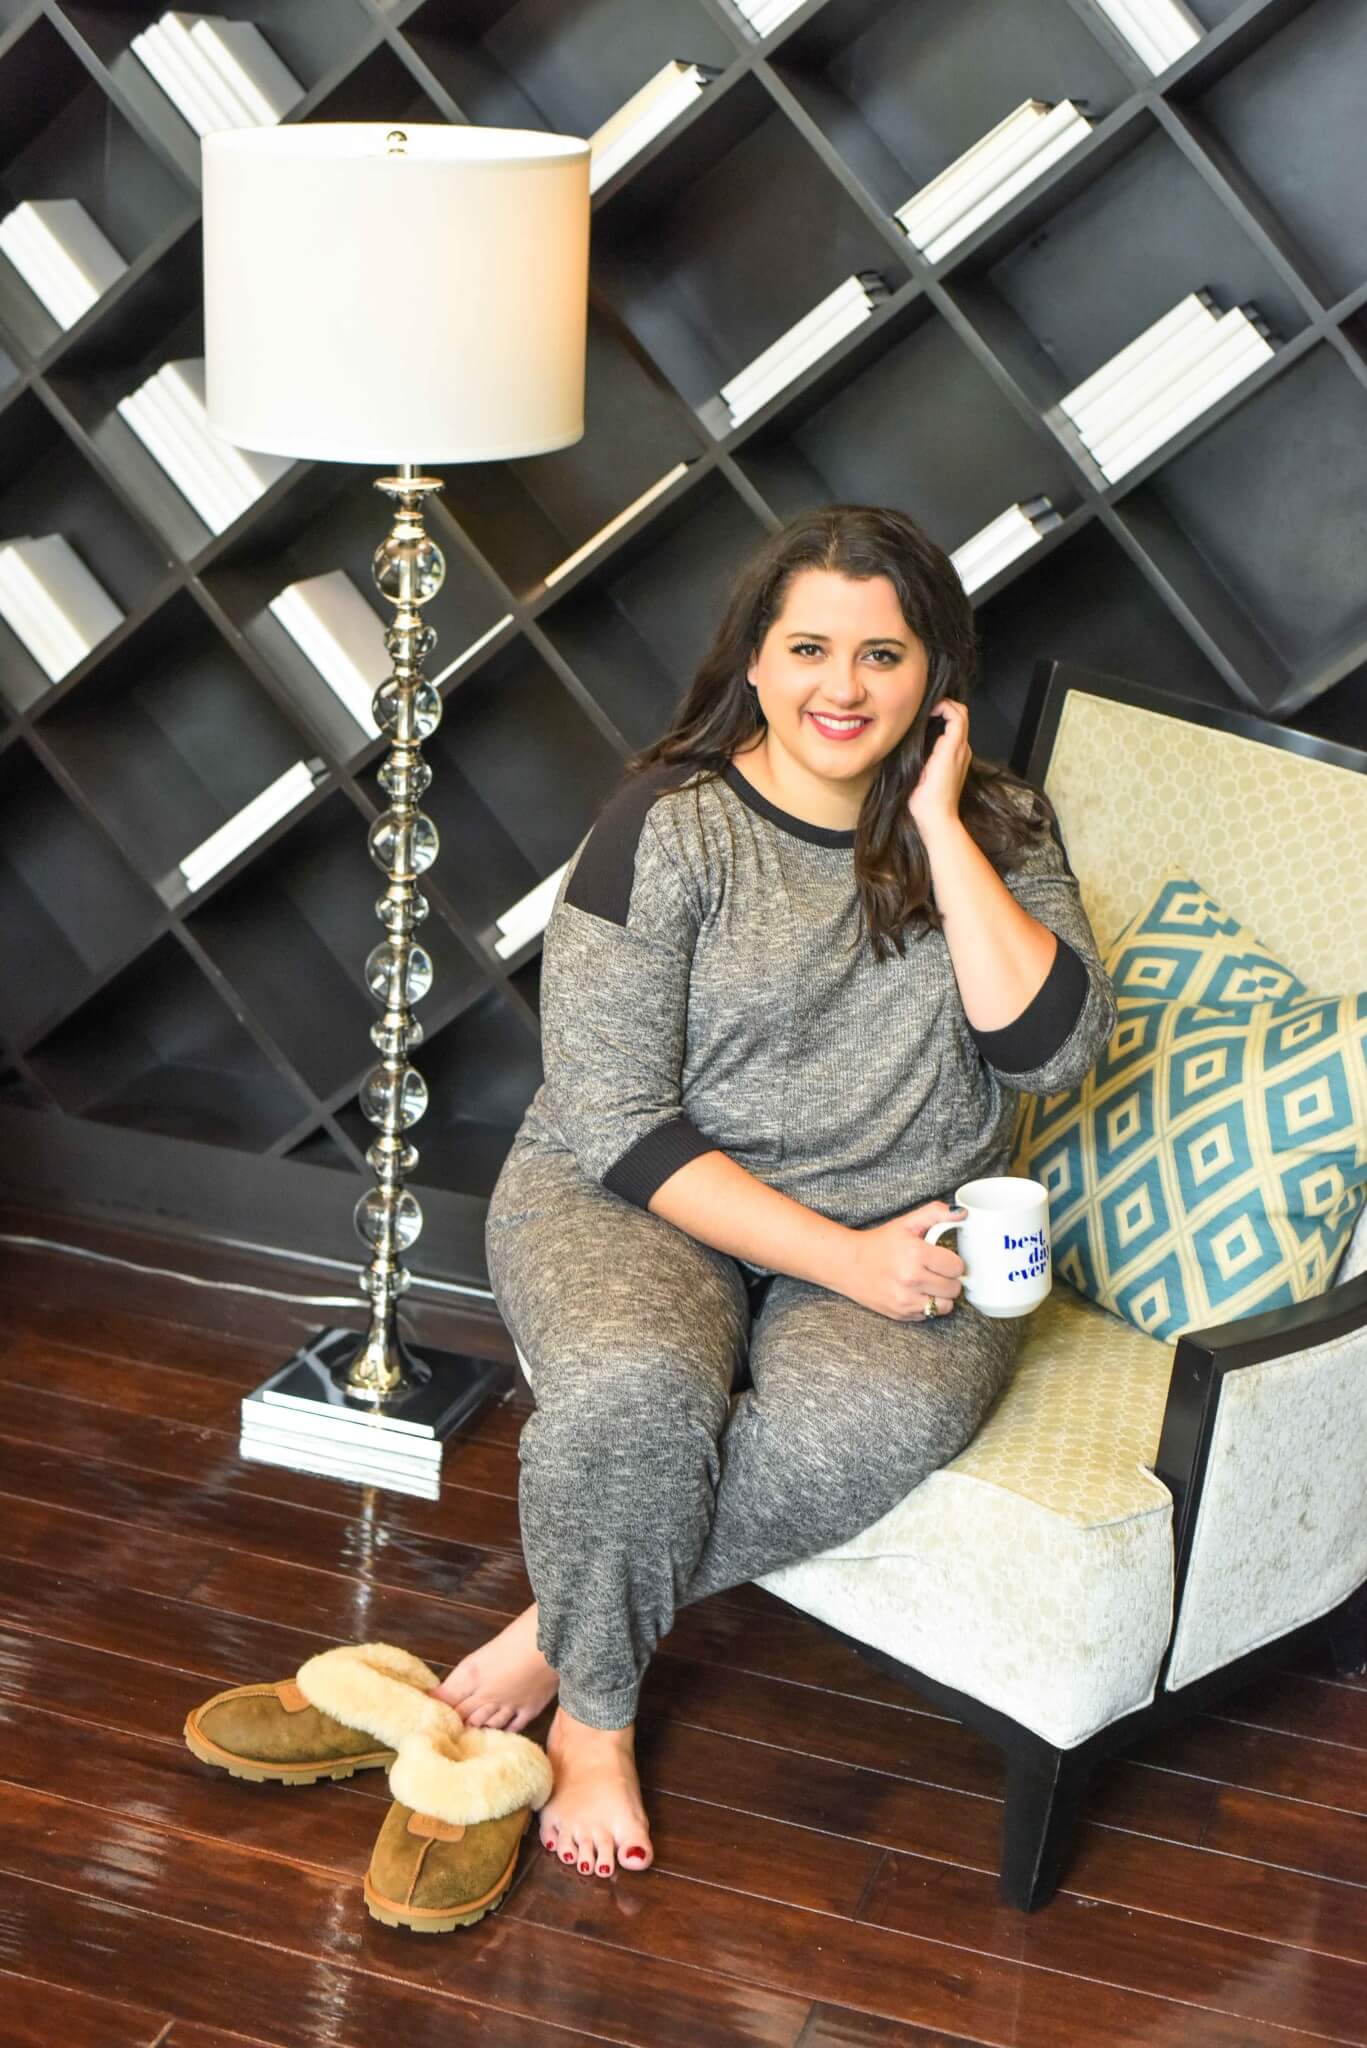 Looking chic while sleeping can make you wake up more rested, right? Ok, there's no science behind it, but if I feel great in them, then why wouldn't it be worth investing in a new pair? Make sure to check out Kohl's vast selection of plus size sleepwear to find your perfect pair. #kohls #affordablestyle #curvystyle - Getting a Better Night's Sleep with Kohl's Plus Size Pajamas by popular Houston fashion blogger Something Gold, Something Blue